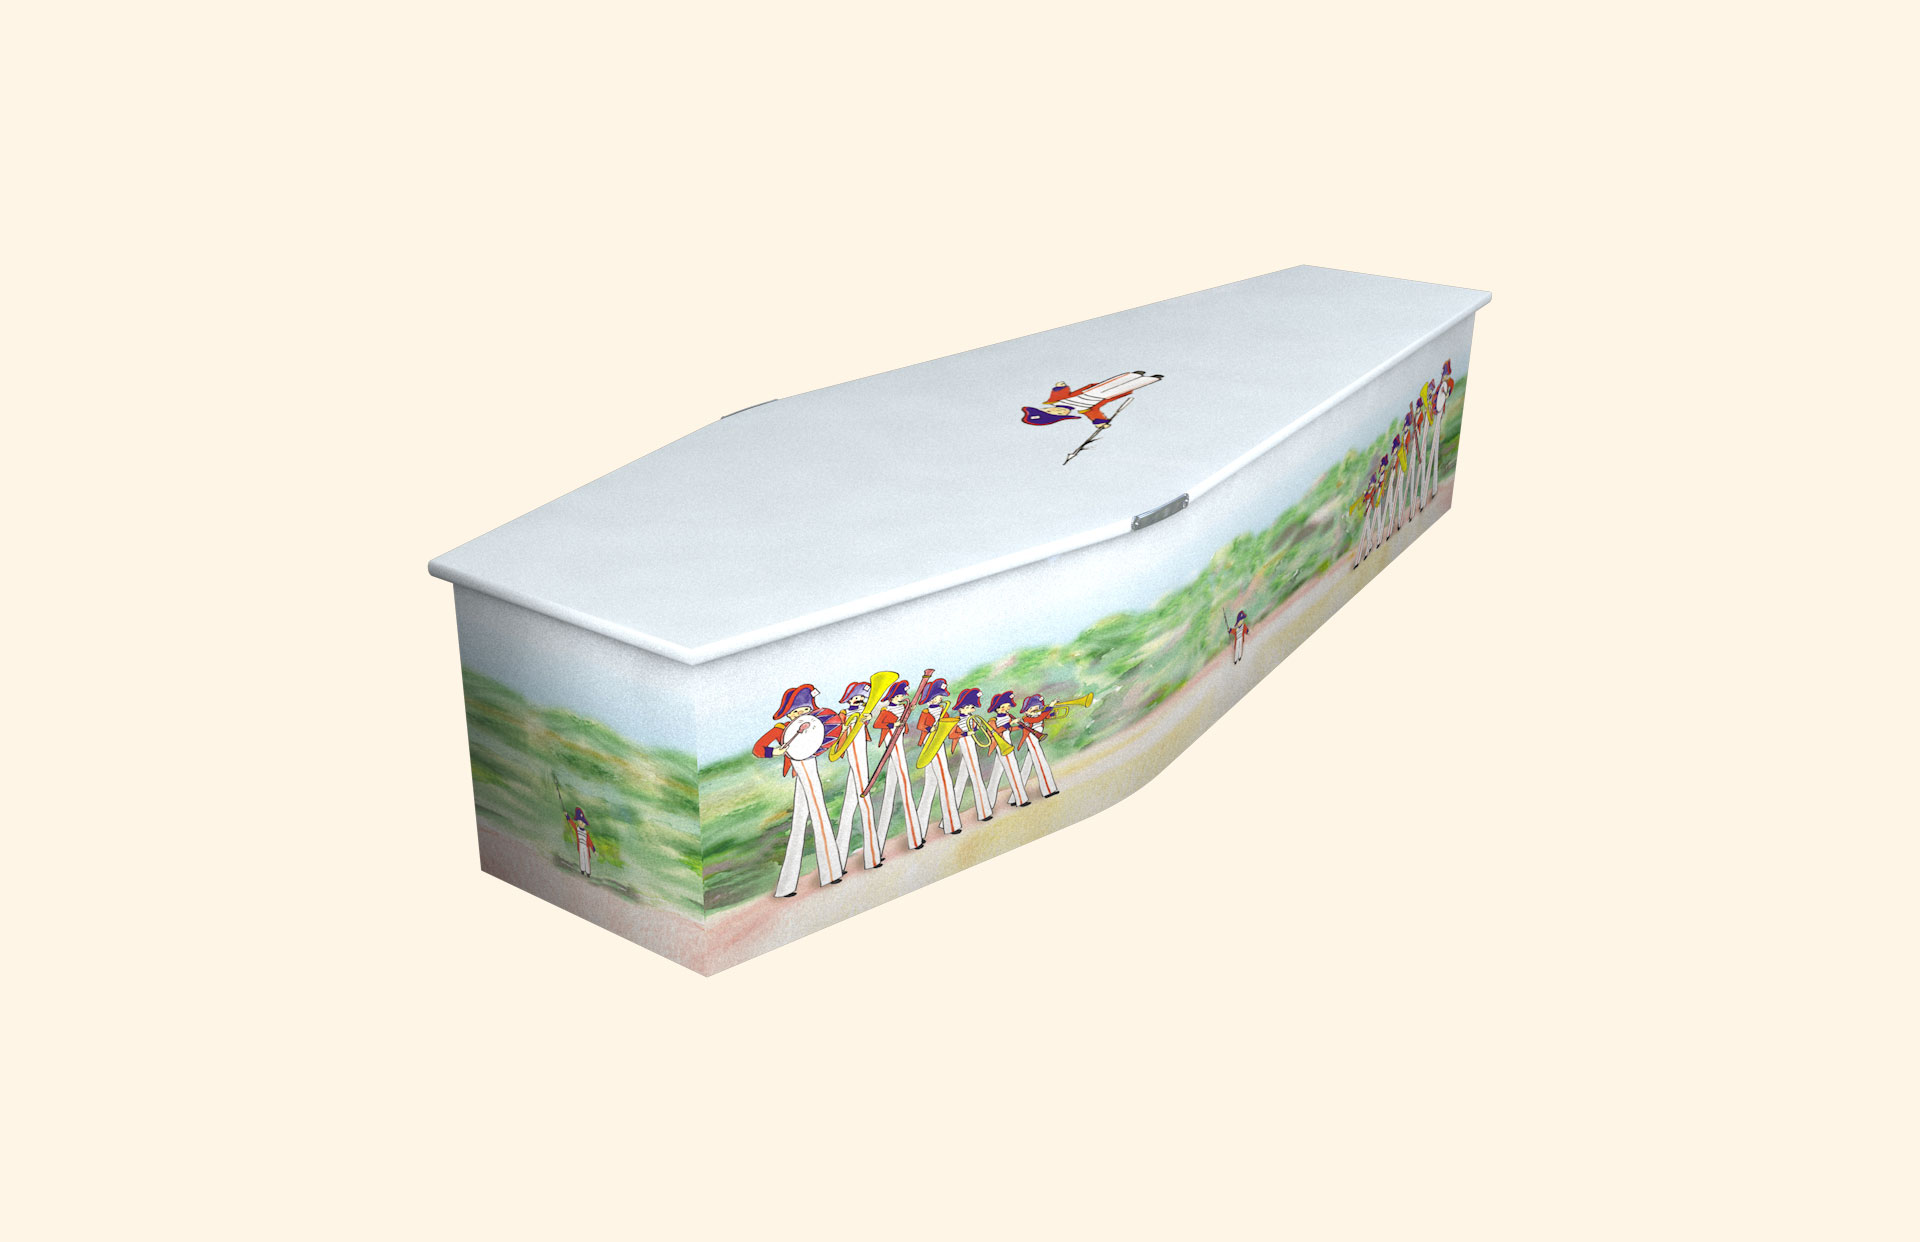 Toy Soldiers on a child coffin